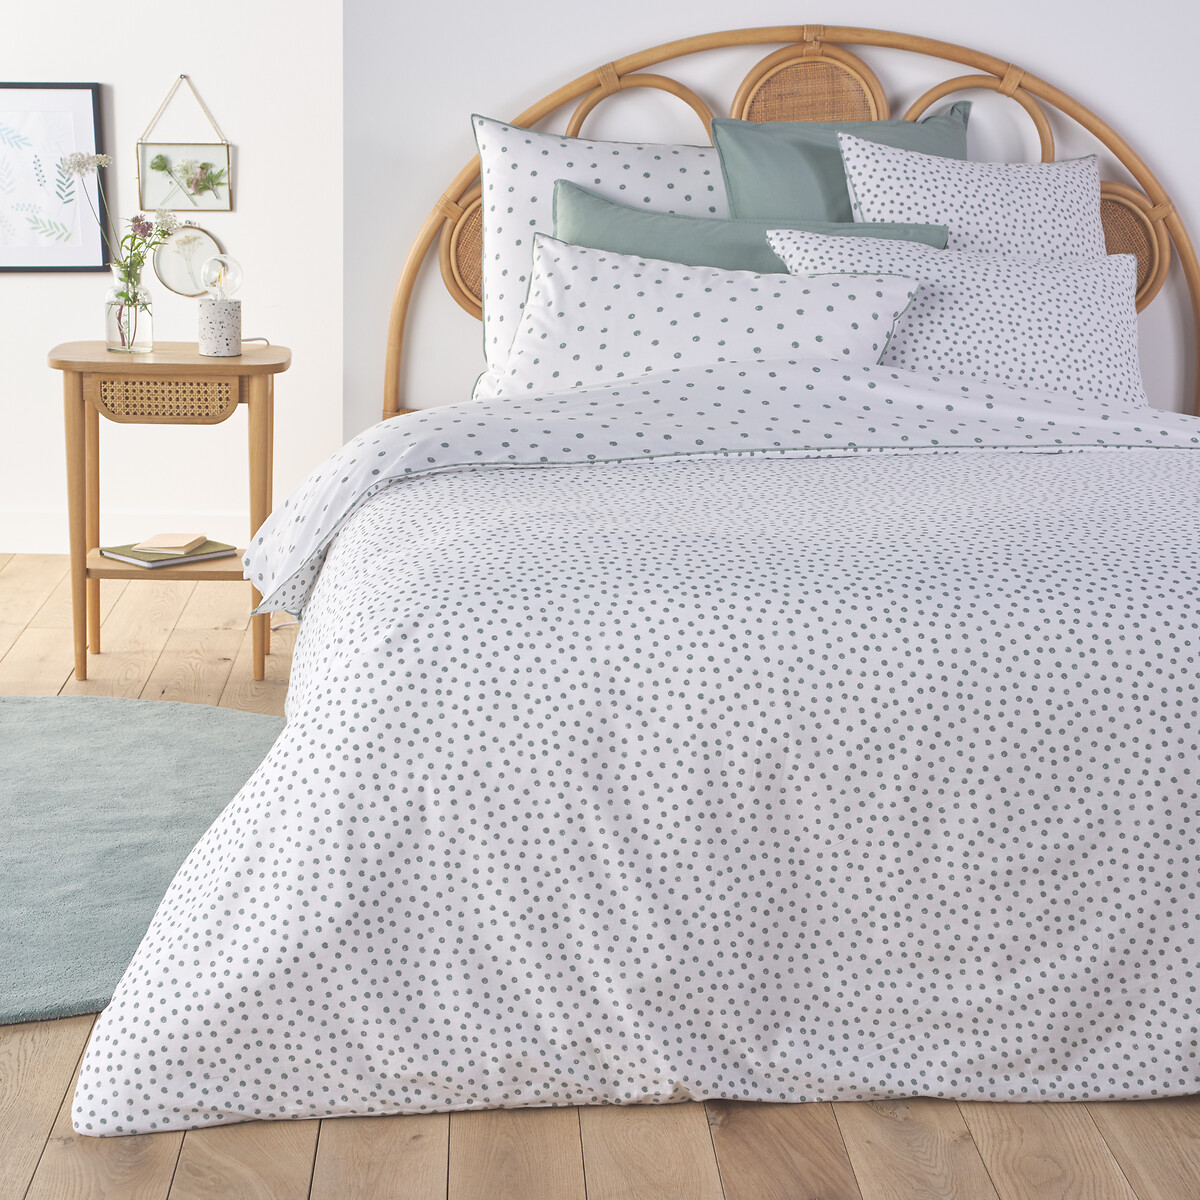 Lison Spotted 100% Washed Cotton Duvet Cover